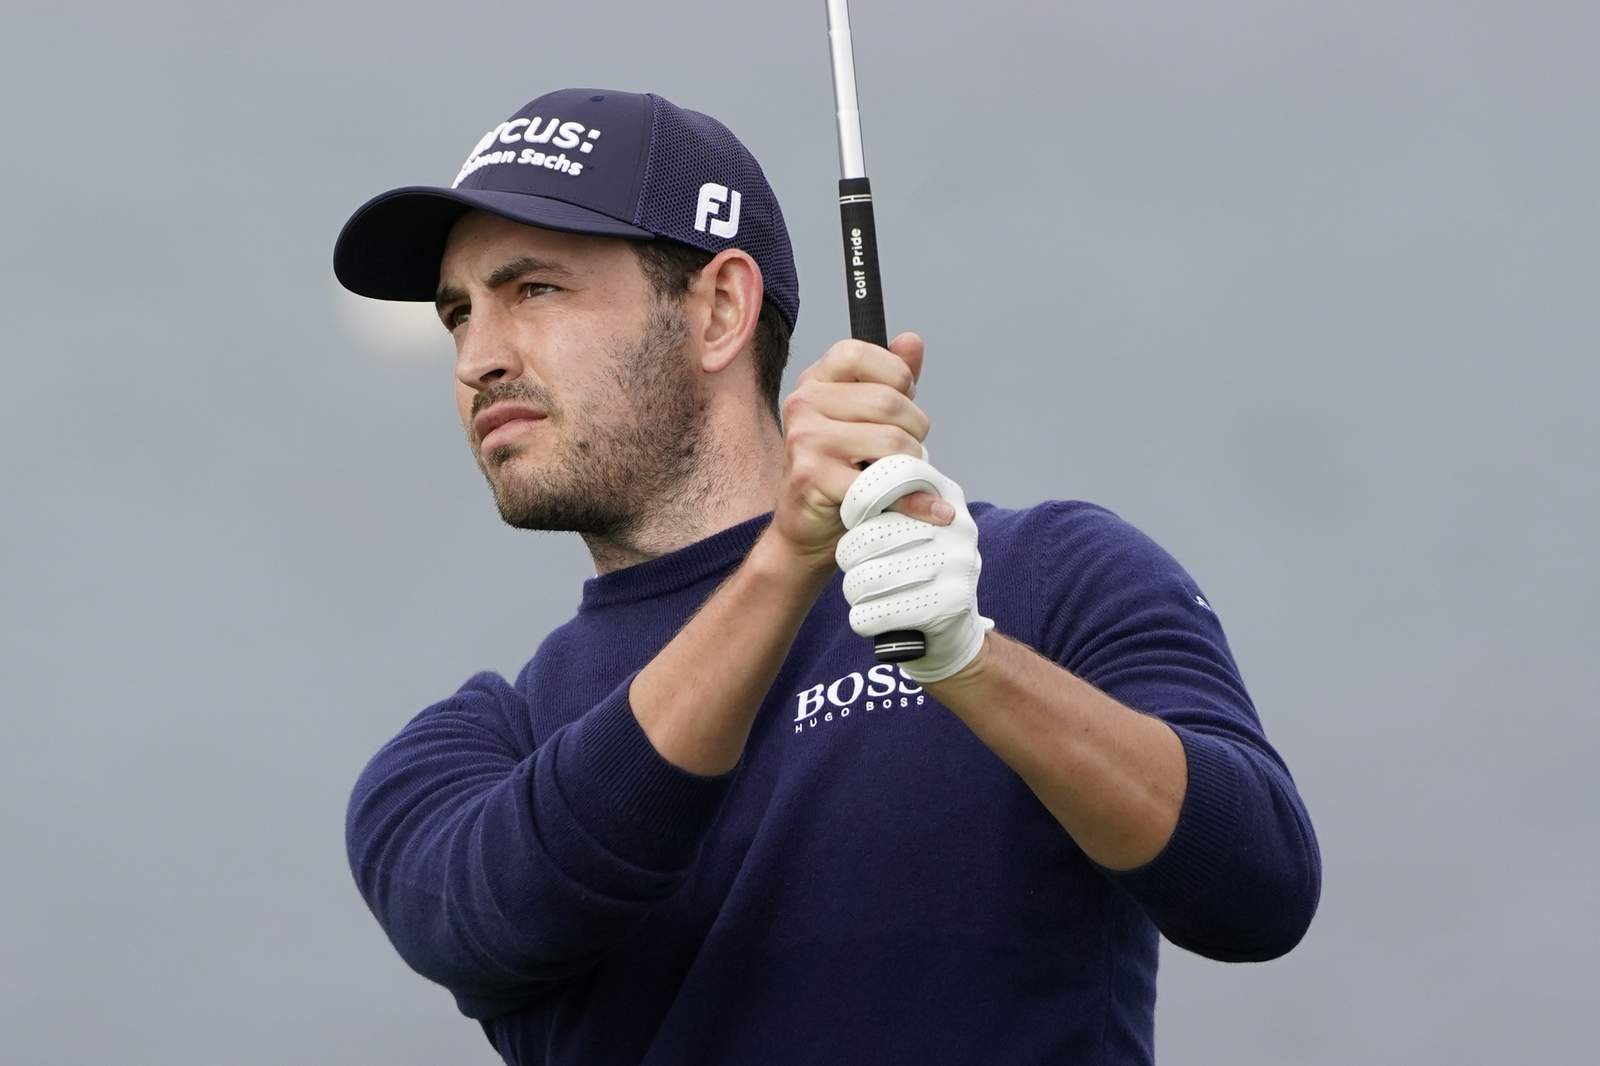 Cantlay ties course record with 62 and leads at Pebble Beach